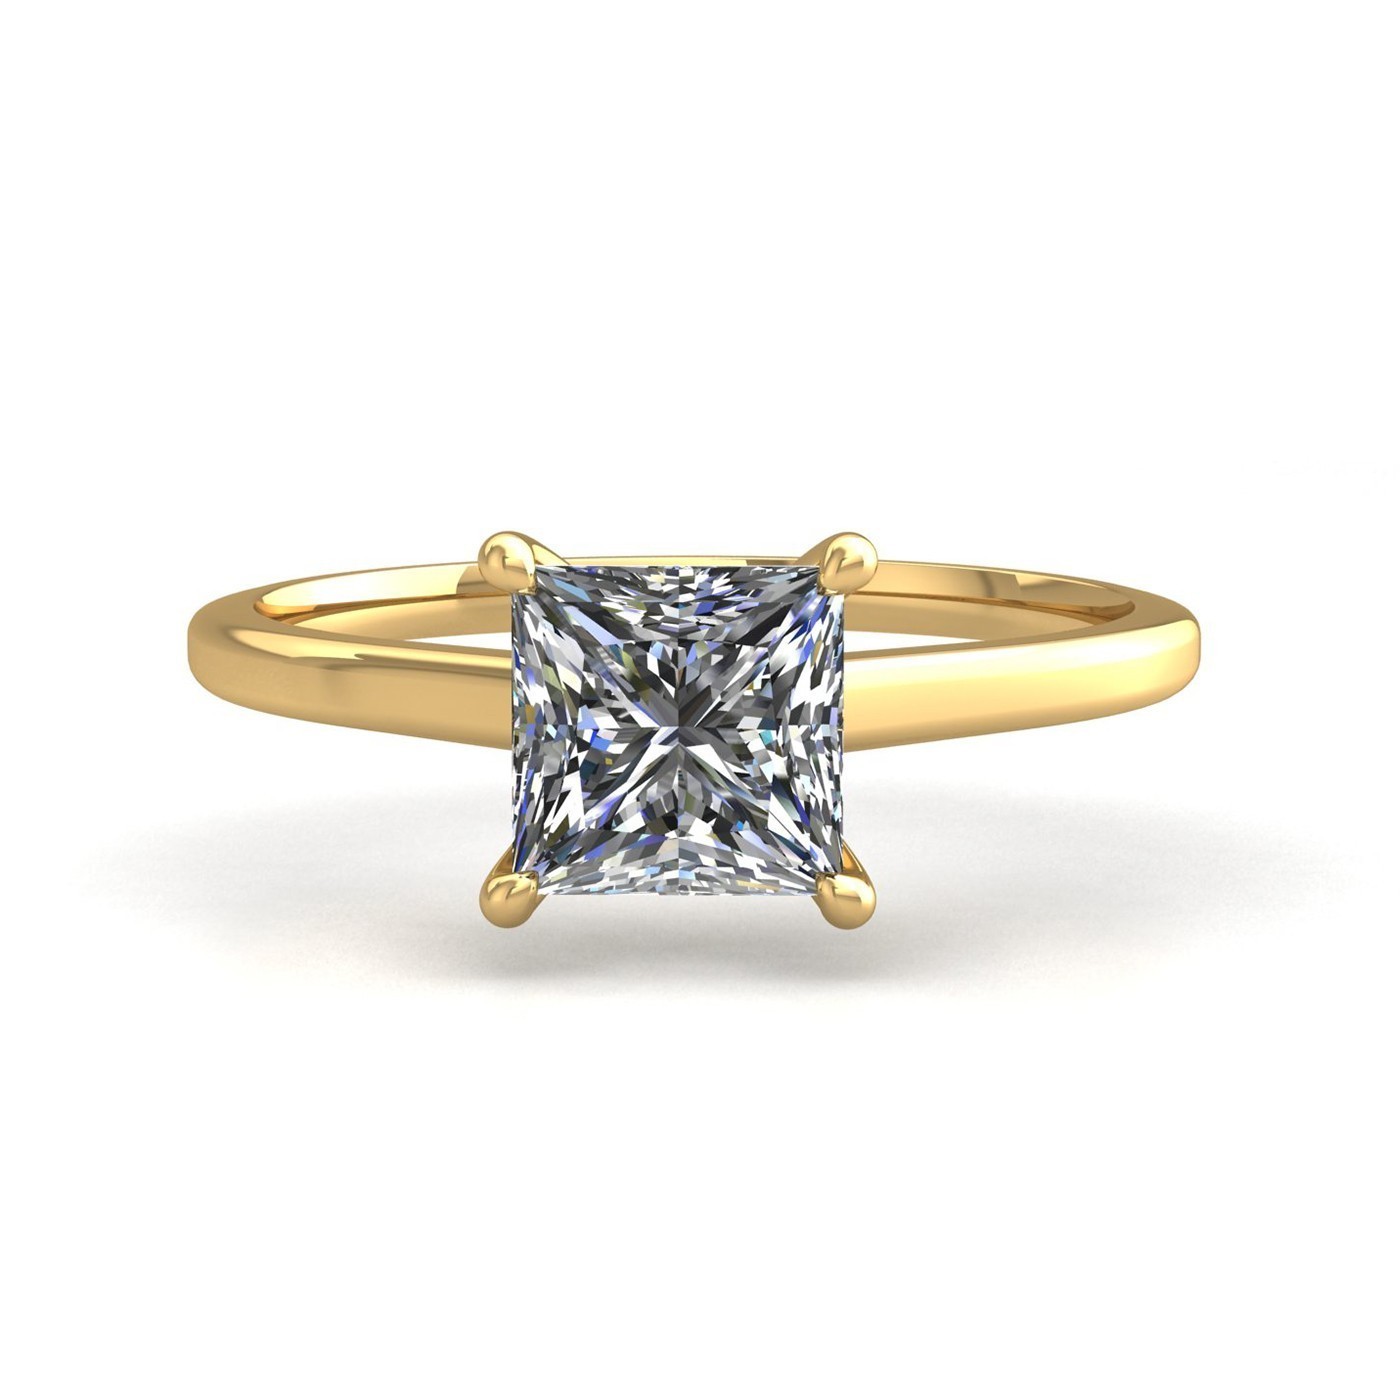 18K YELLOW GOLD 4 PRONGS SOLITAIRE PRINCESS CUT DIAMOND ENGAGEMENT RING WITH WHISPER THIN BAND